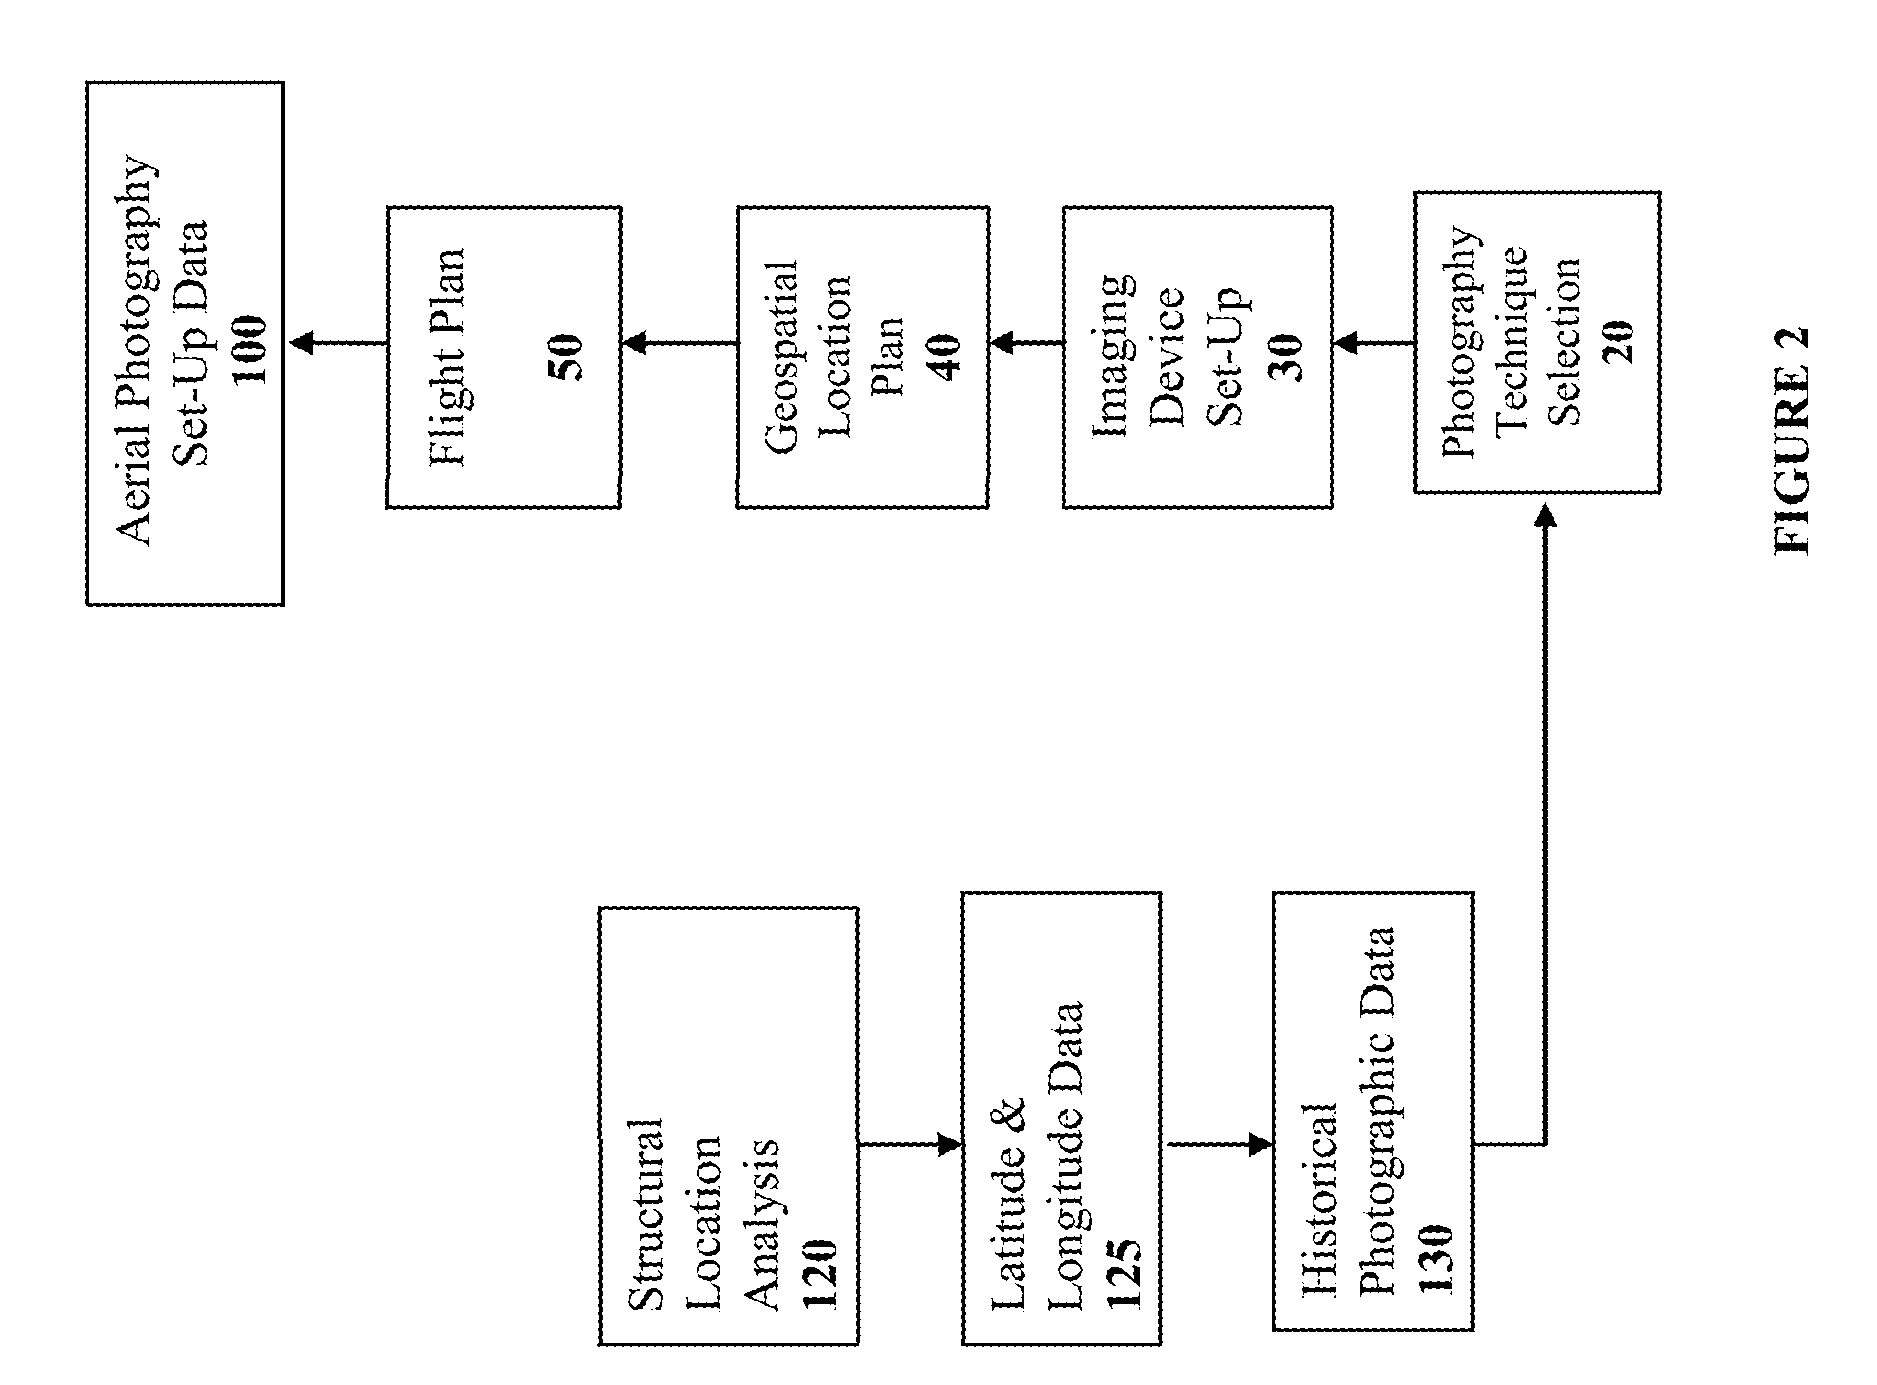 Method and System for Remotely Inspecting Bridges and Other Structures